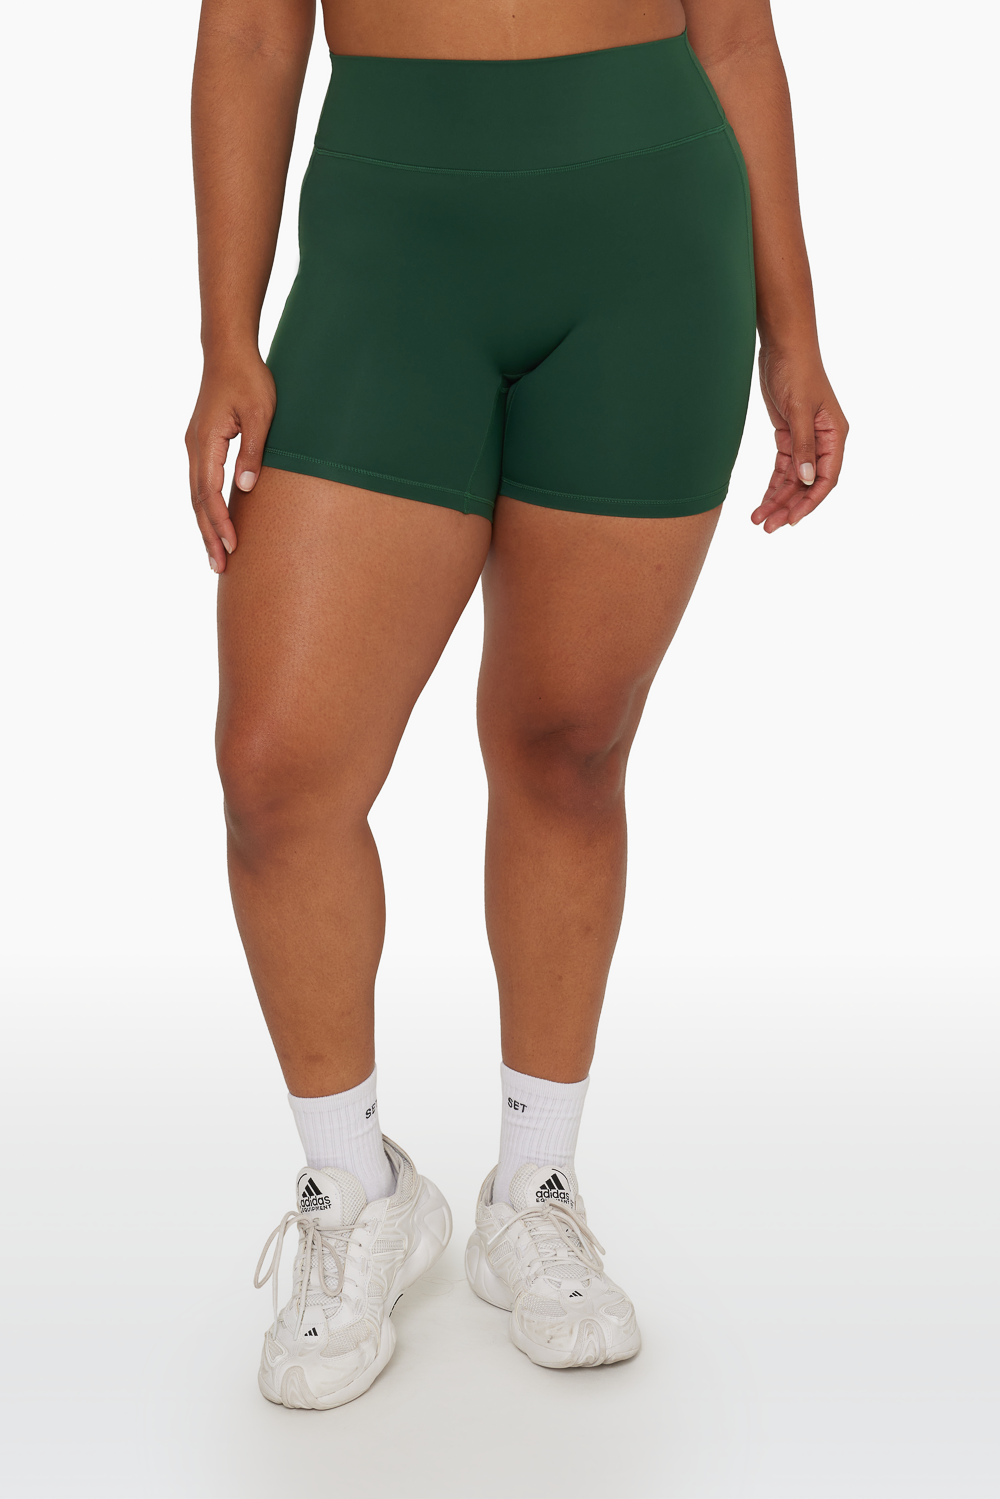 SPORTBODY® BIKE SHORTS - SYCAMORE Featured Image